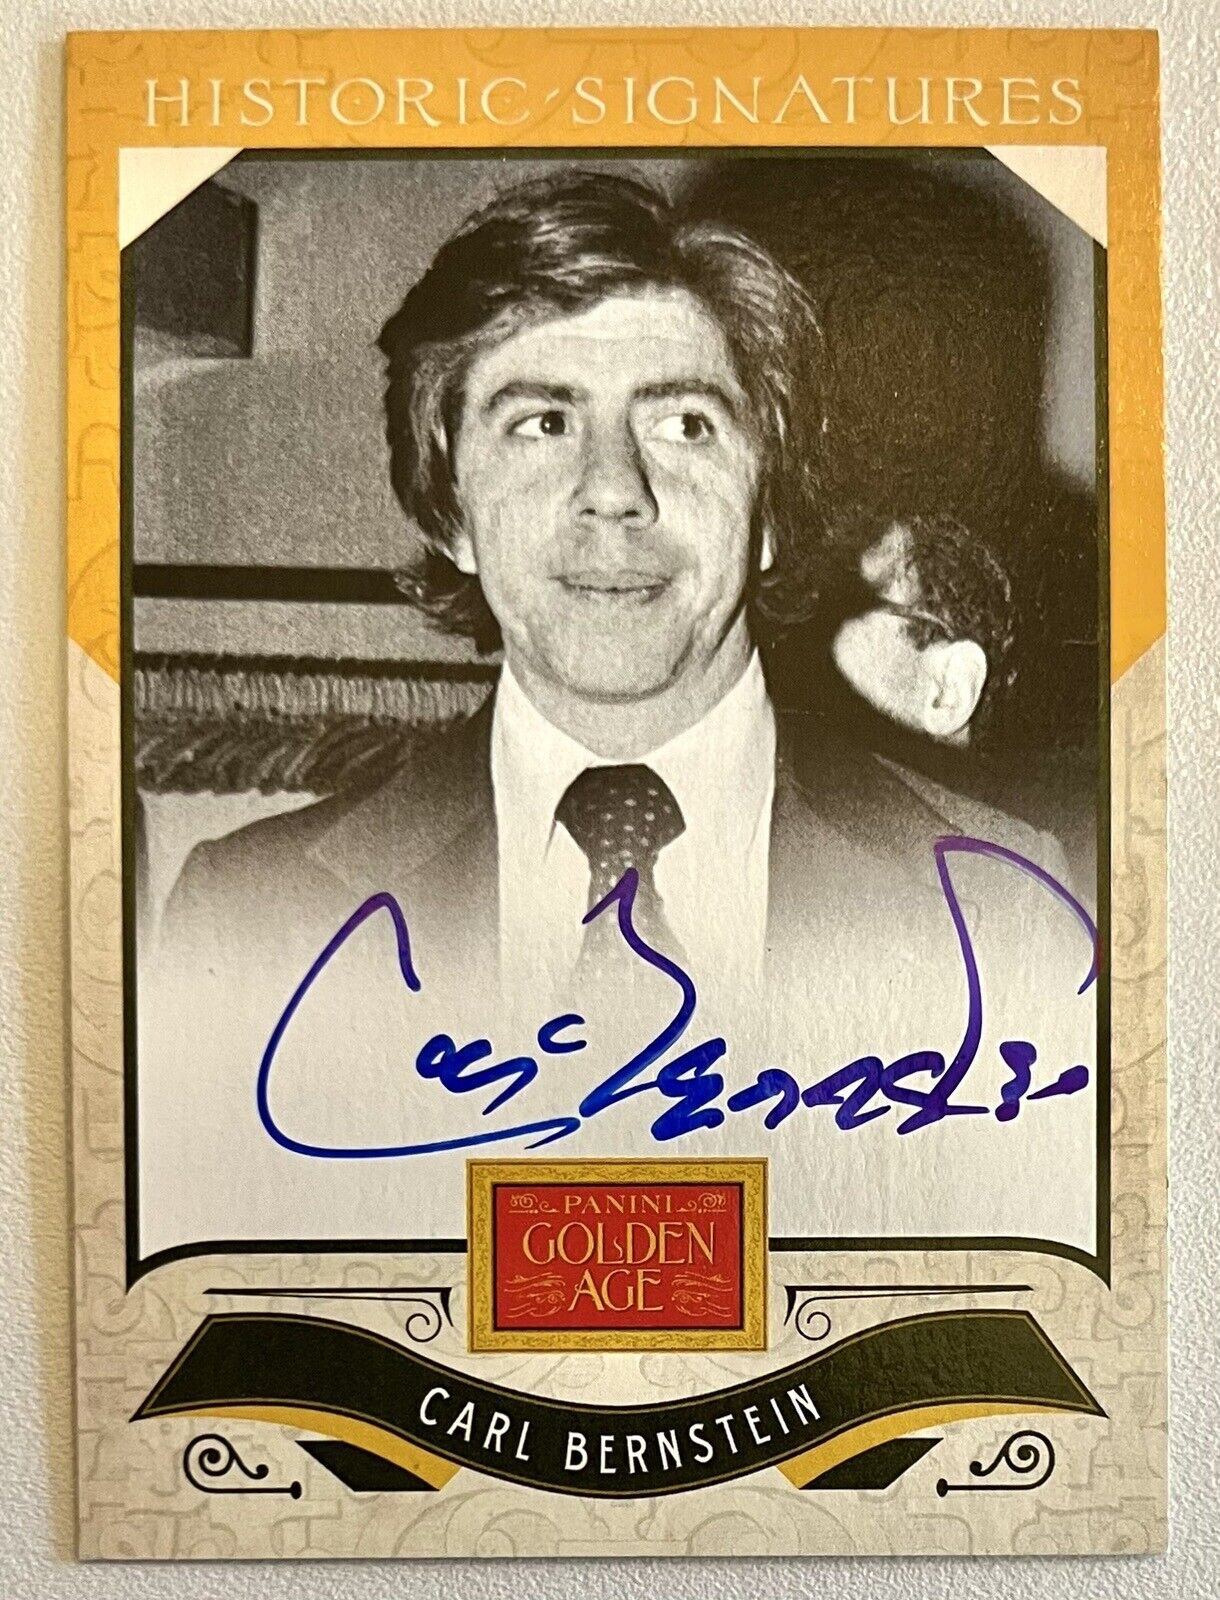 2012 Panini Golden Age Carl Bernstein ON CARD AUTO CB Watergate Reporter Signed